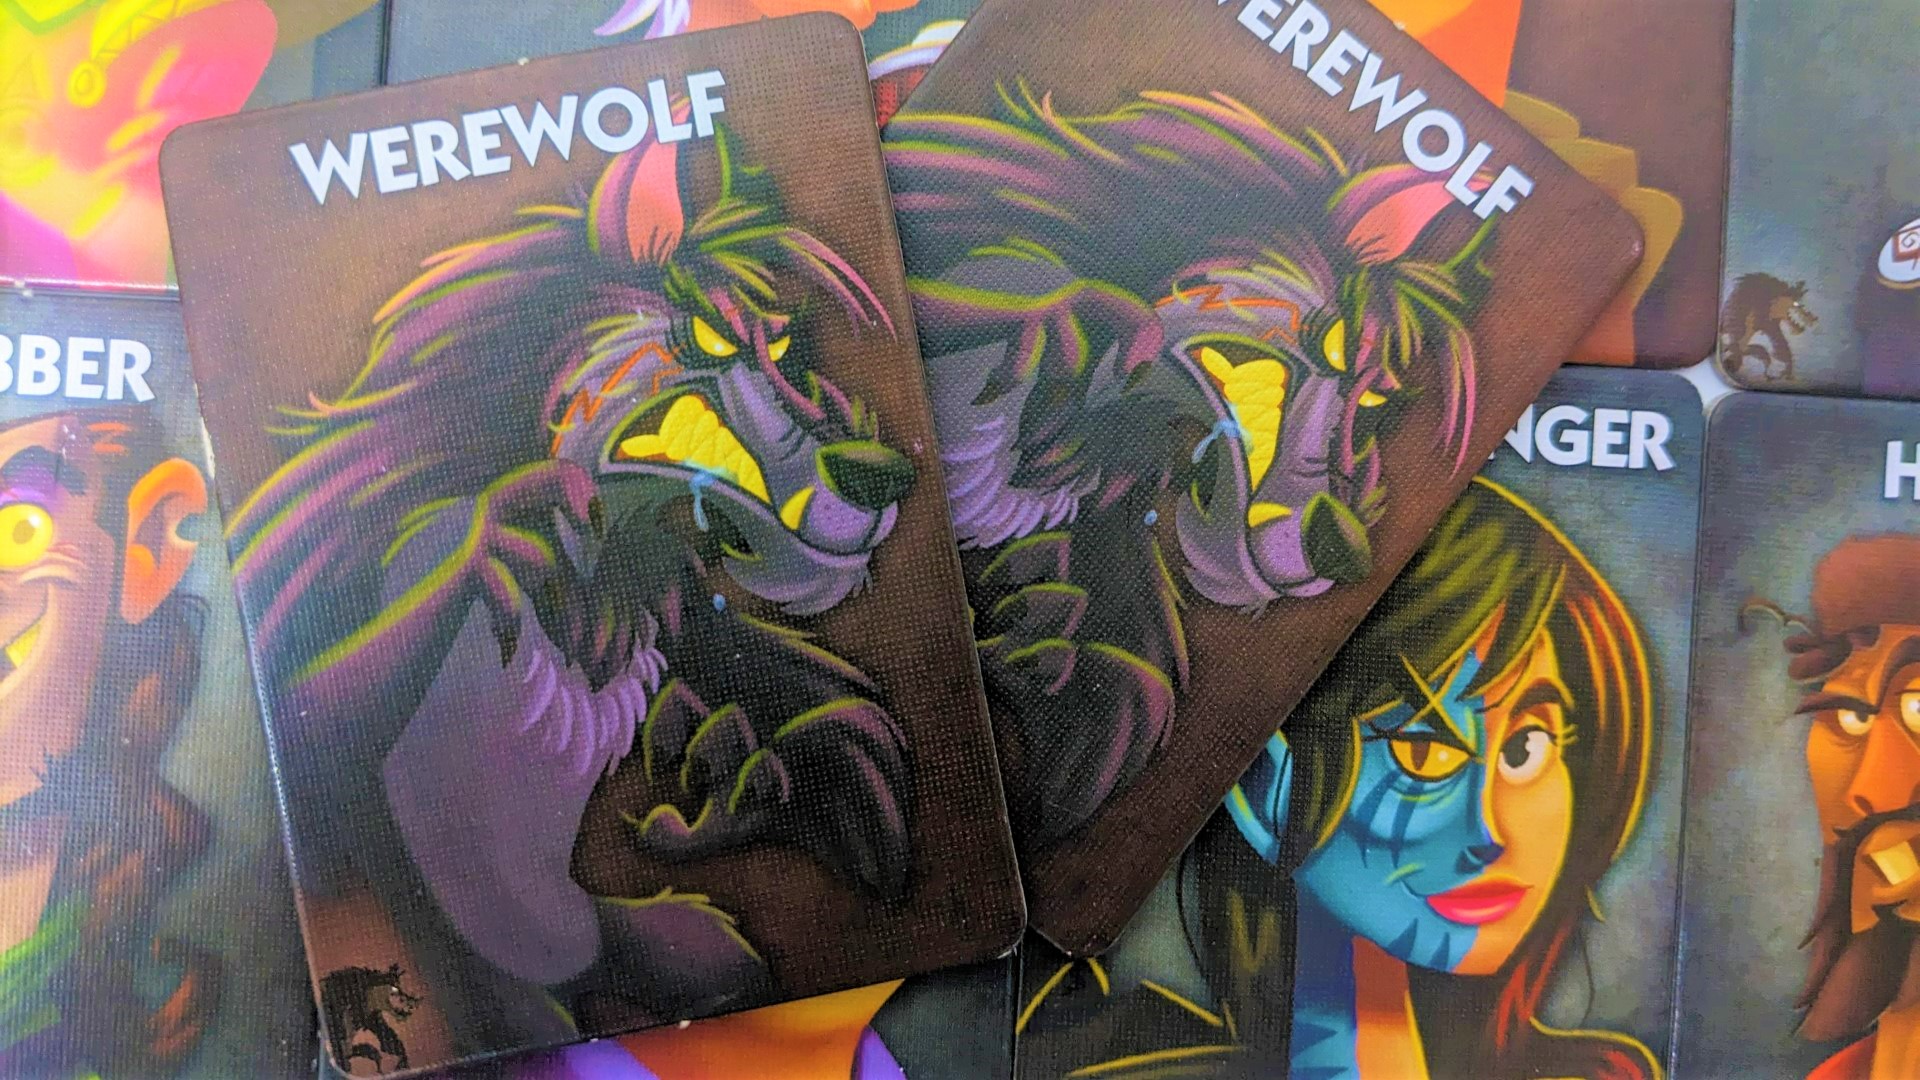 Werewolf cards from One Night Ultimate Werewolf, one of the best gateway games